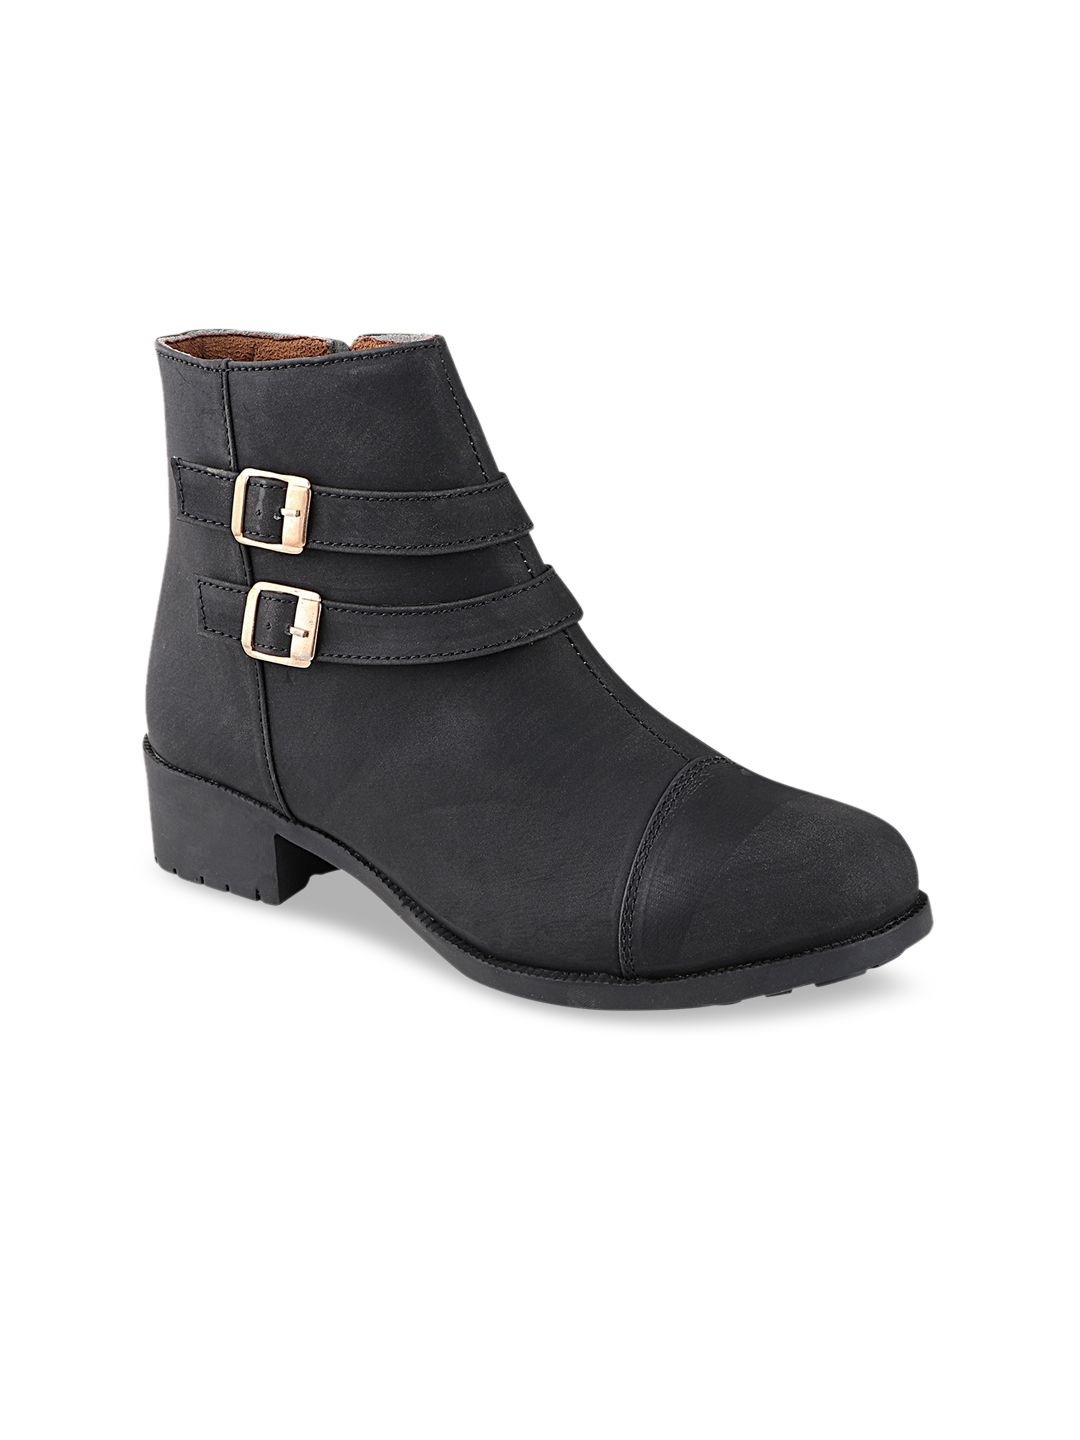 Shoetopia Black Block Heeled Boots with Buckles Price in India